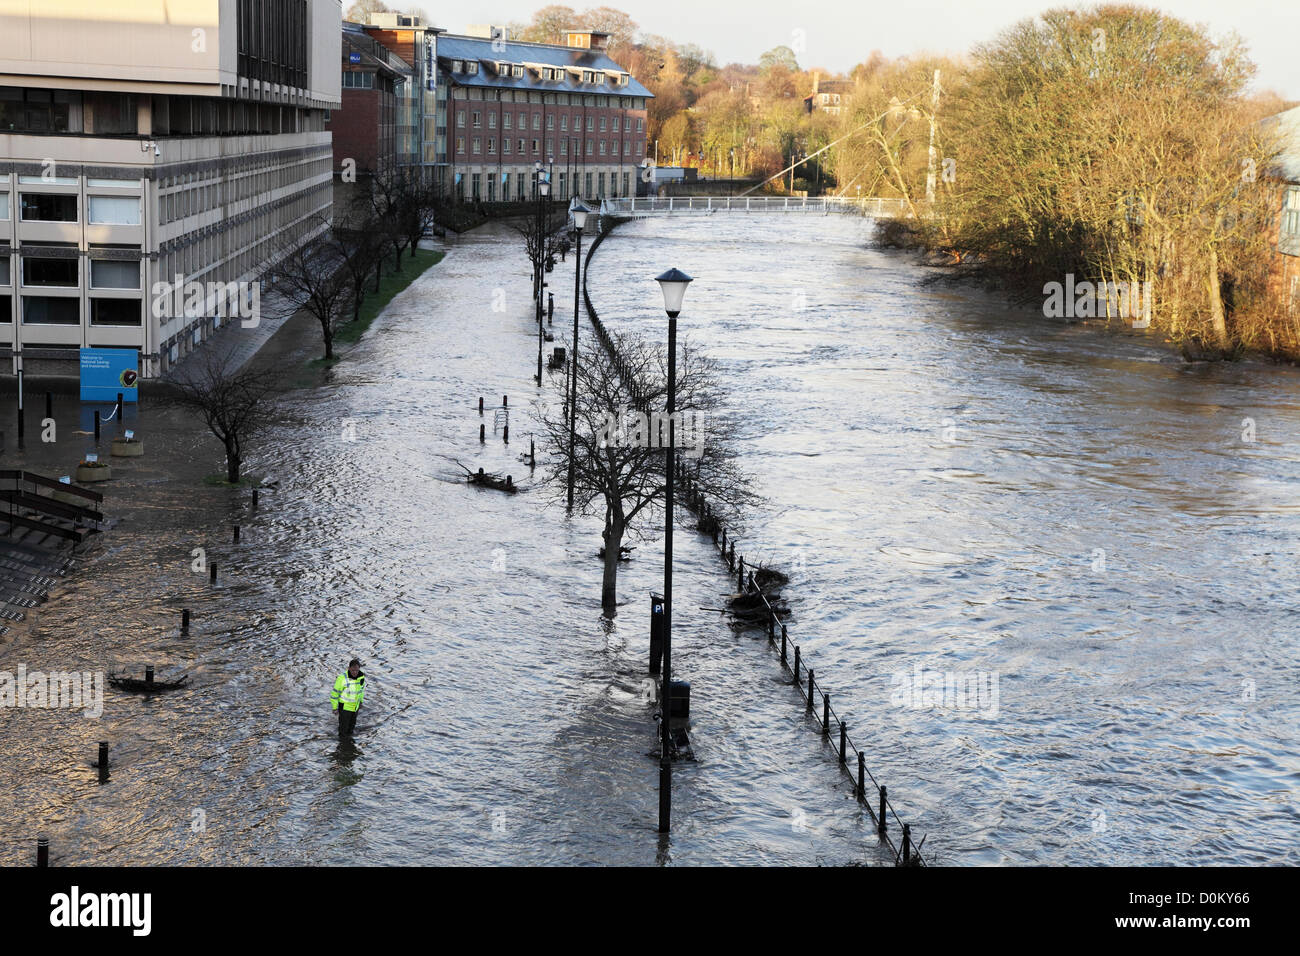 Durham, UK. 27th November 2012. Police officer checks depth of flood water as river Wear overflows its banks within Durham City. Credit:  Washington Imaging / Alamy Live News Stock Photo